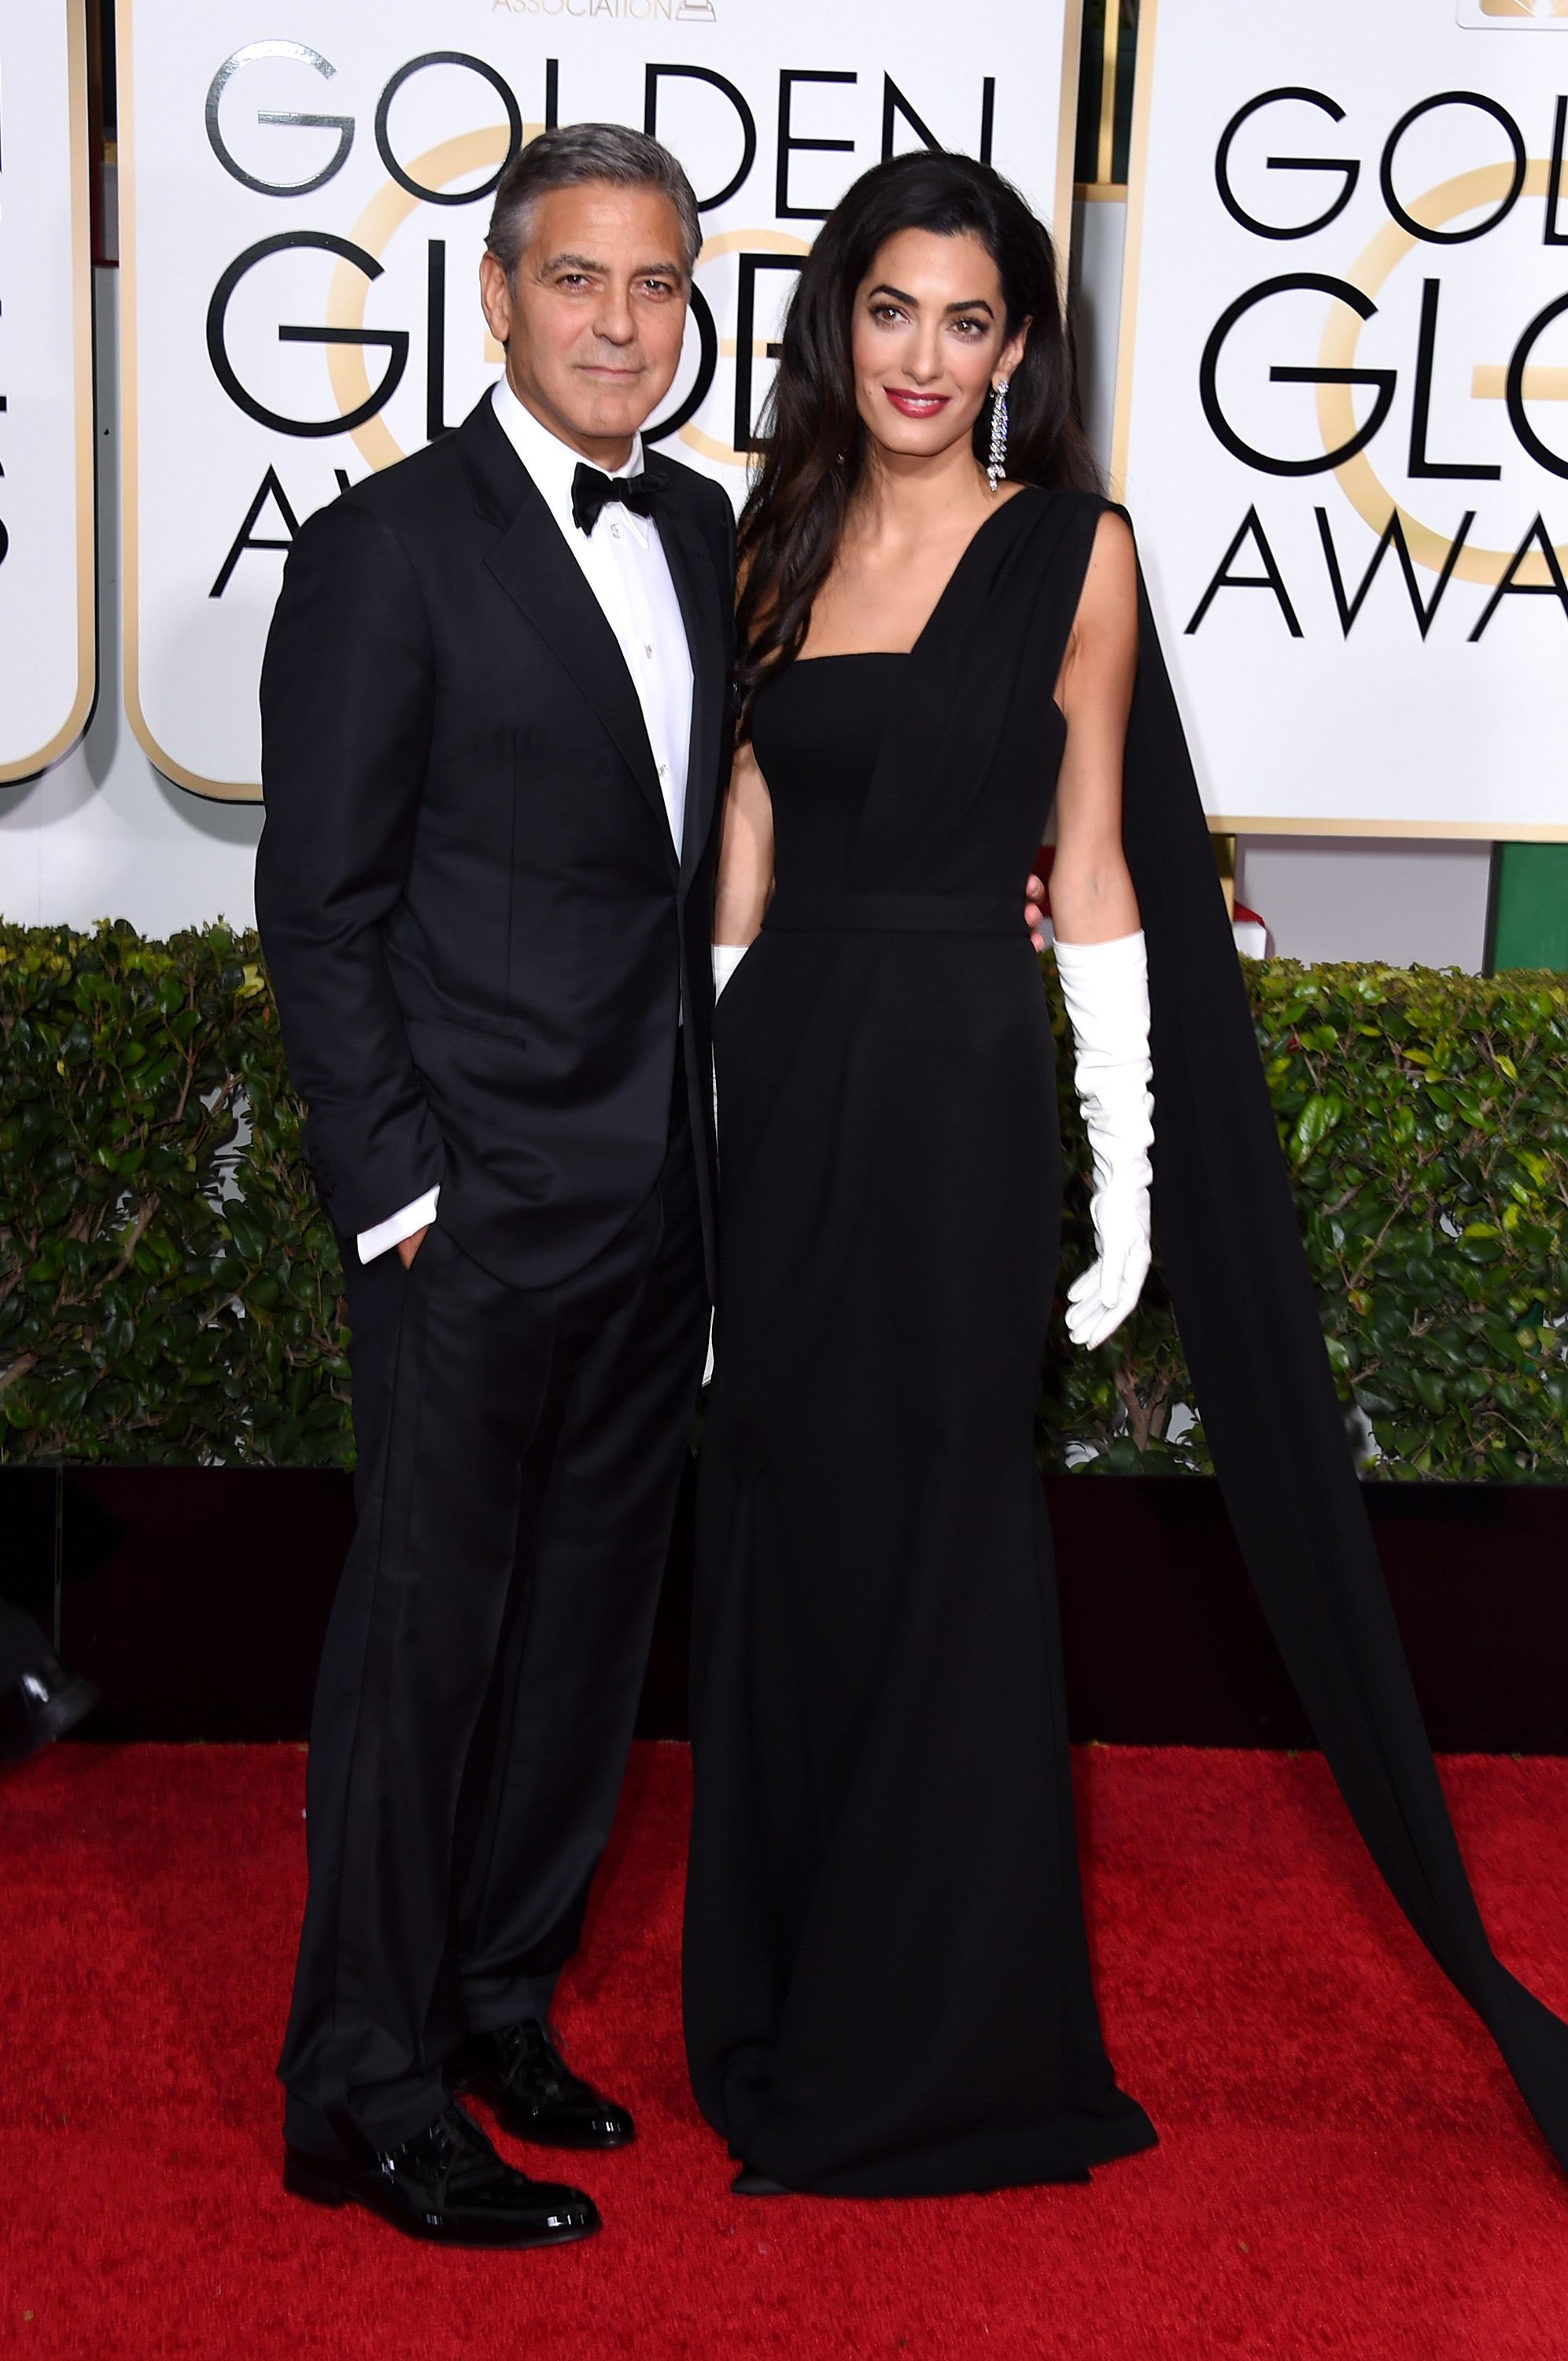 George and Amal Clooney at the 72nd Annual Golden Globe Awards in Beverly Hills, California on January 11, 2015 | Source: Getty Images